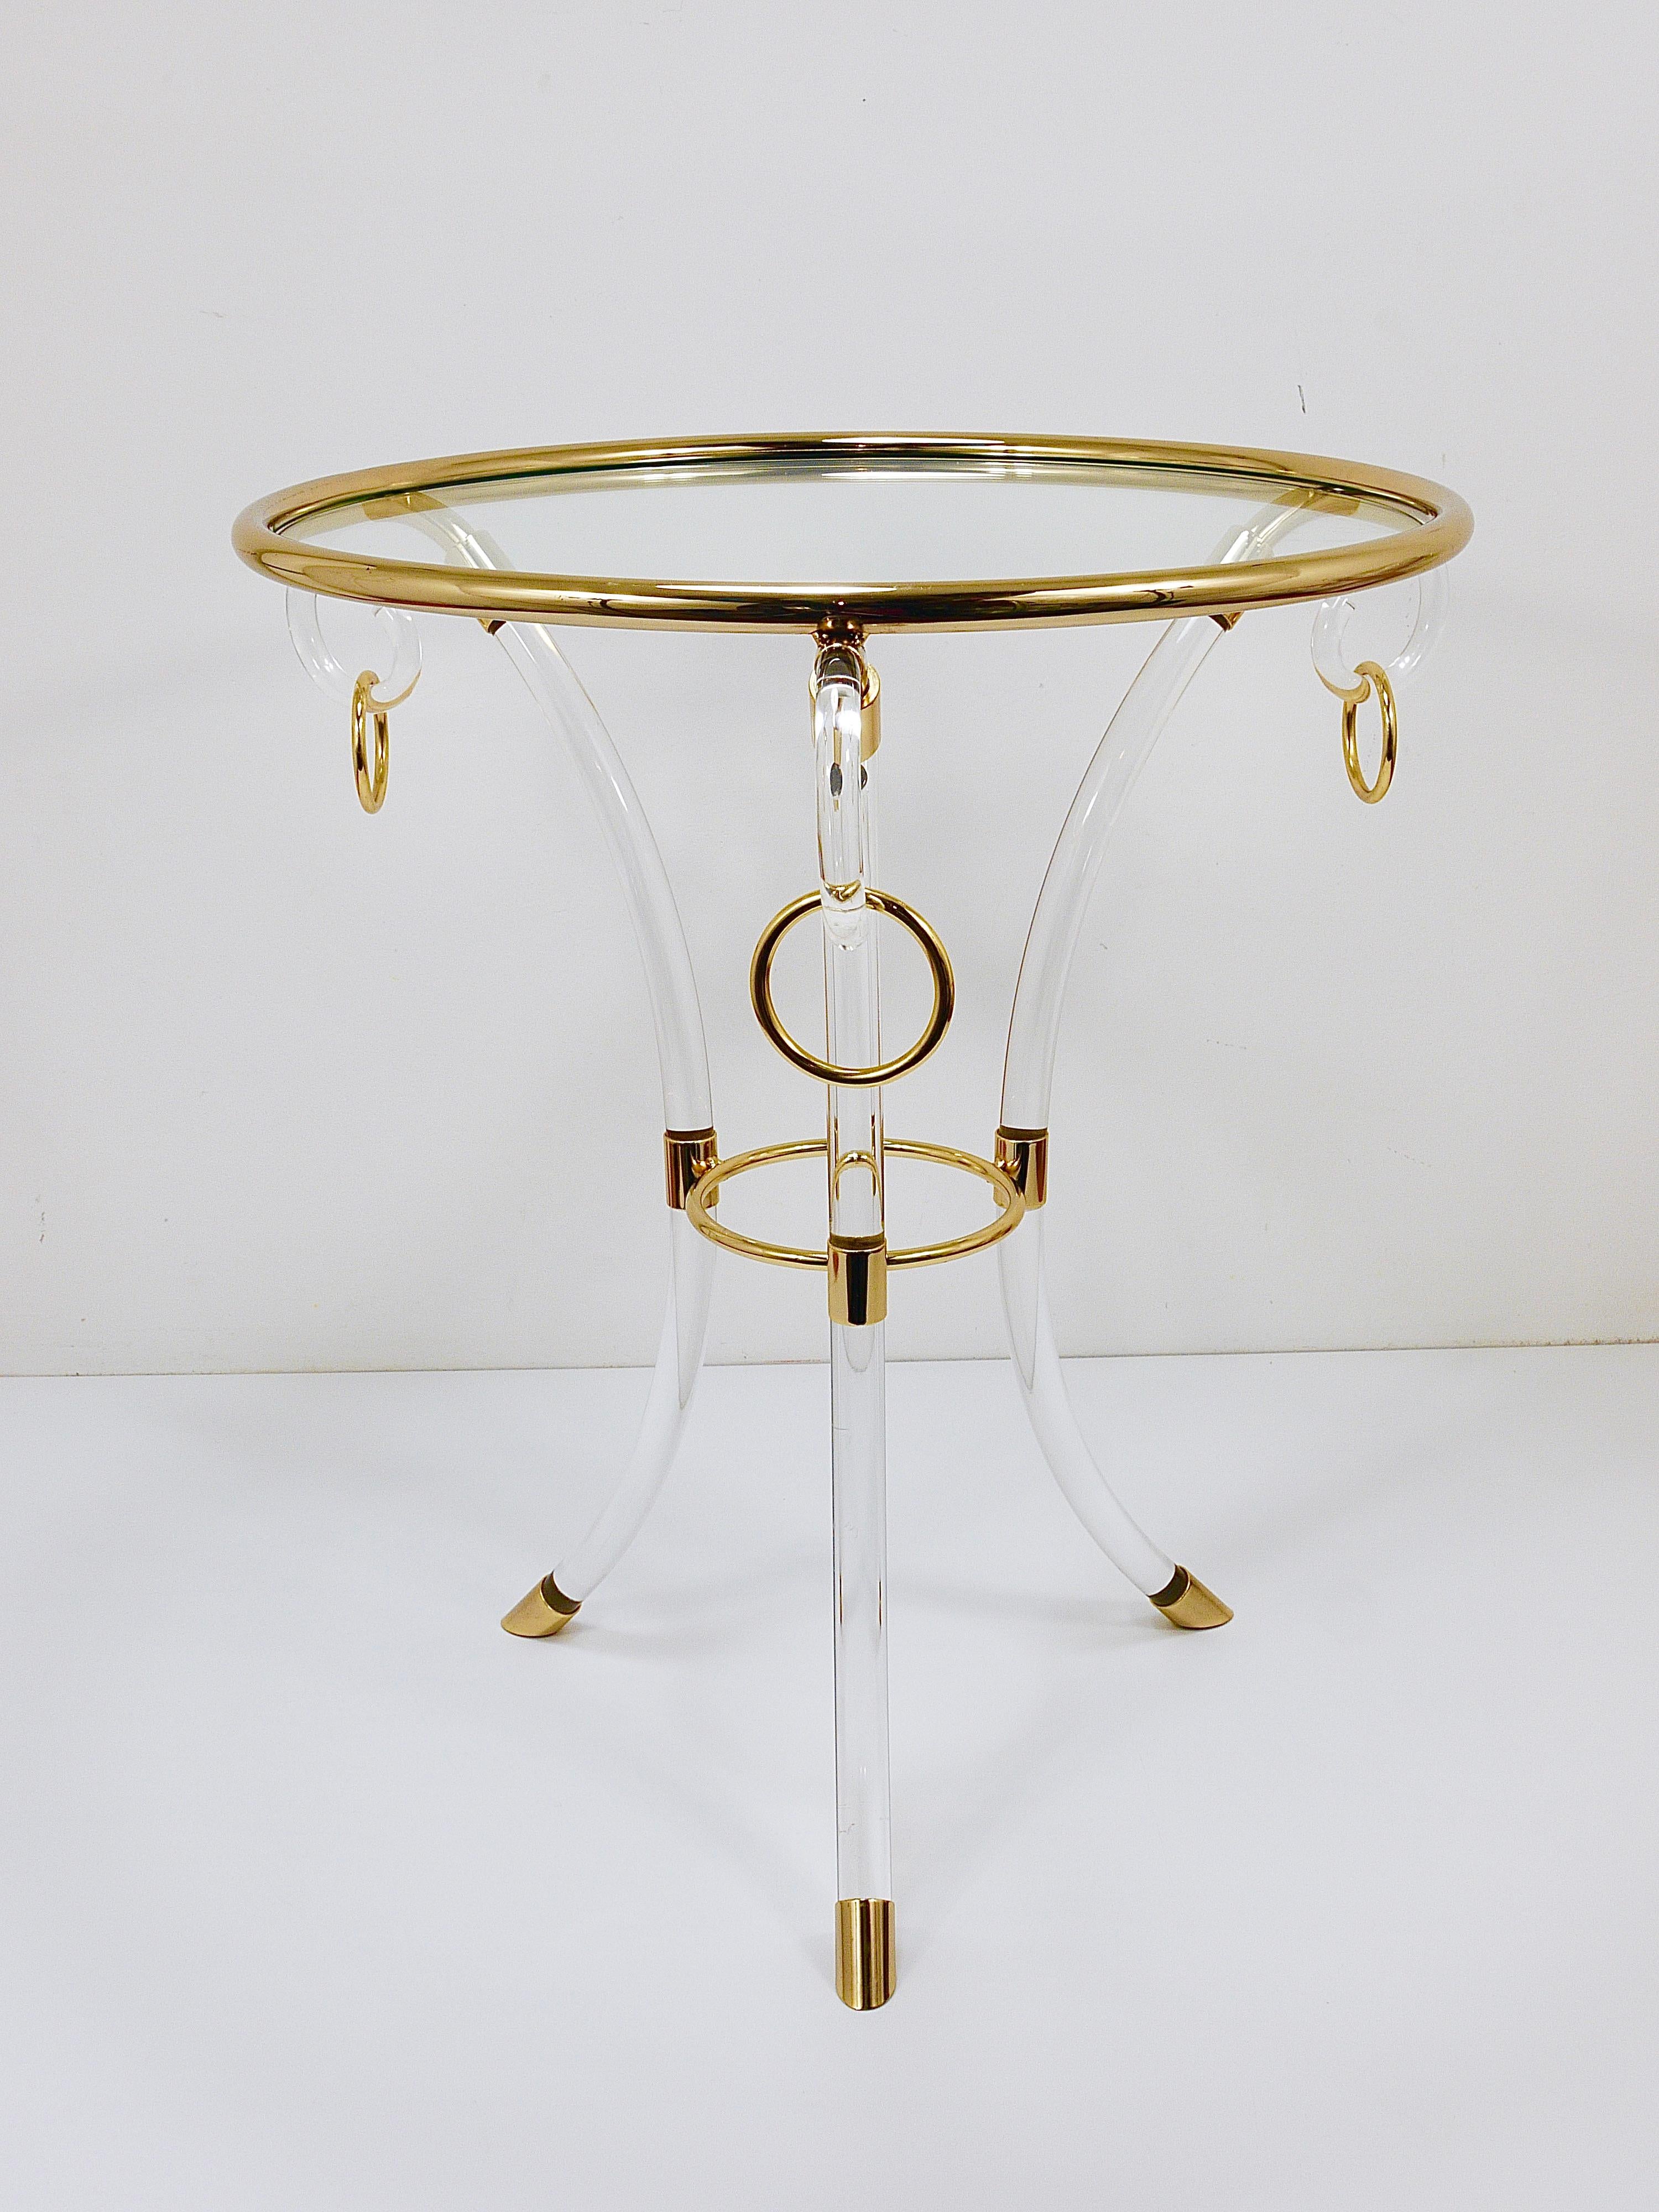 This French round coffee table / side table from the 1970s captures the essence of the Hollywood Regency era. Crafted from clear acrylic Perspex glass / plexiglass and gilded metal, it features elegant golden details.  The three curved lucite legs